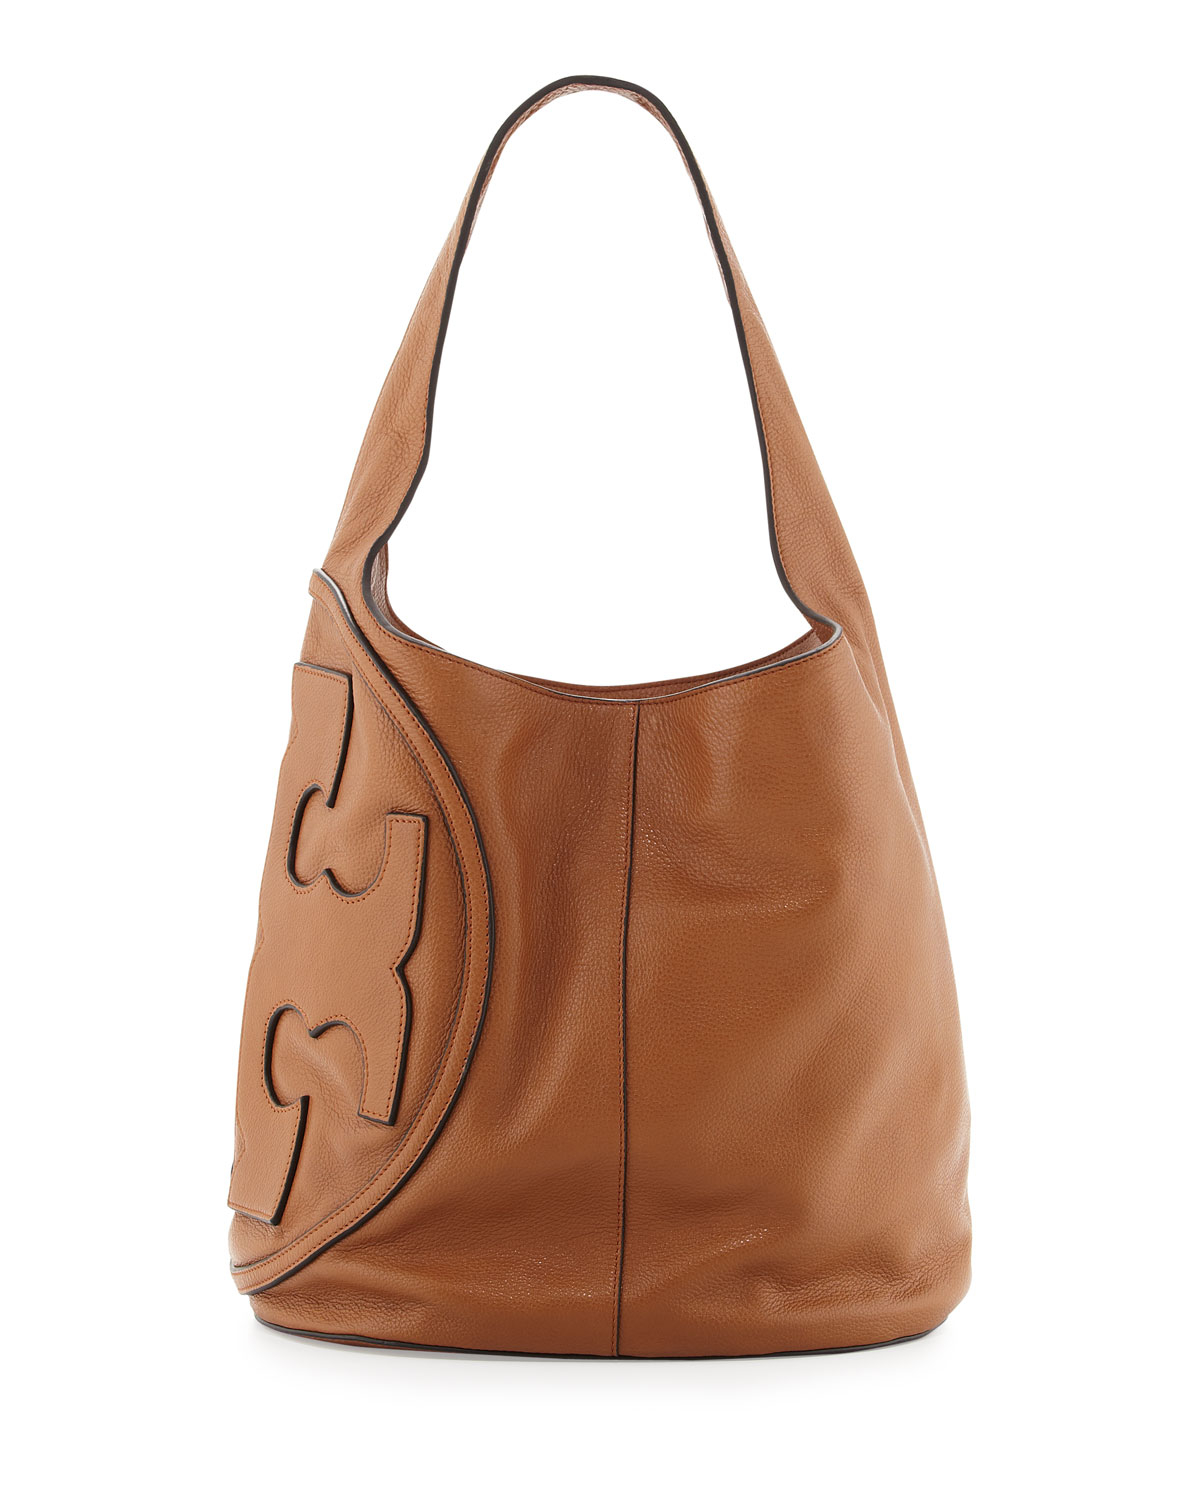 Tory Burch All T Pebbled-Leather Hobo in Brown - Lyst